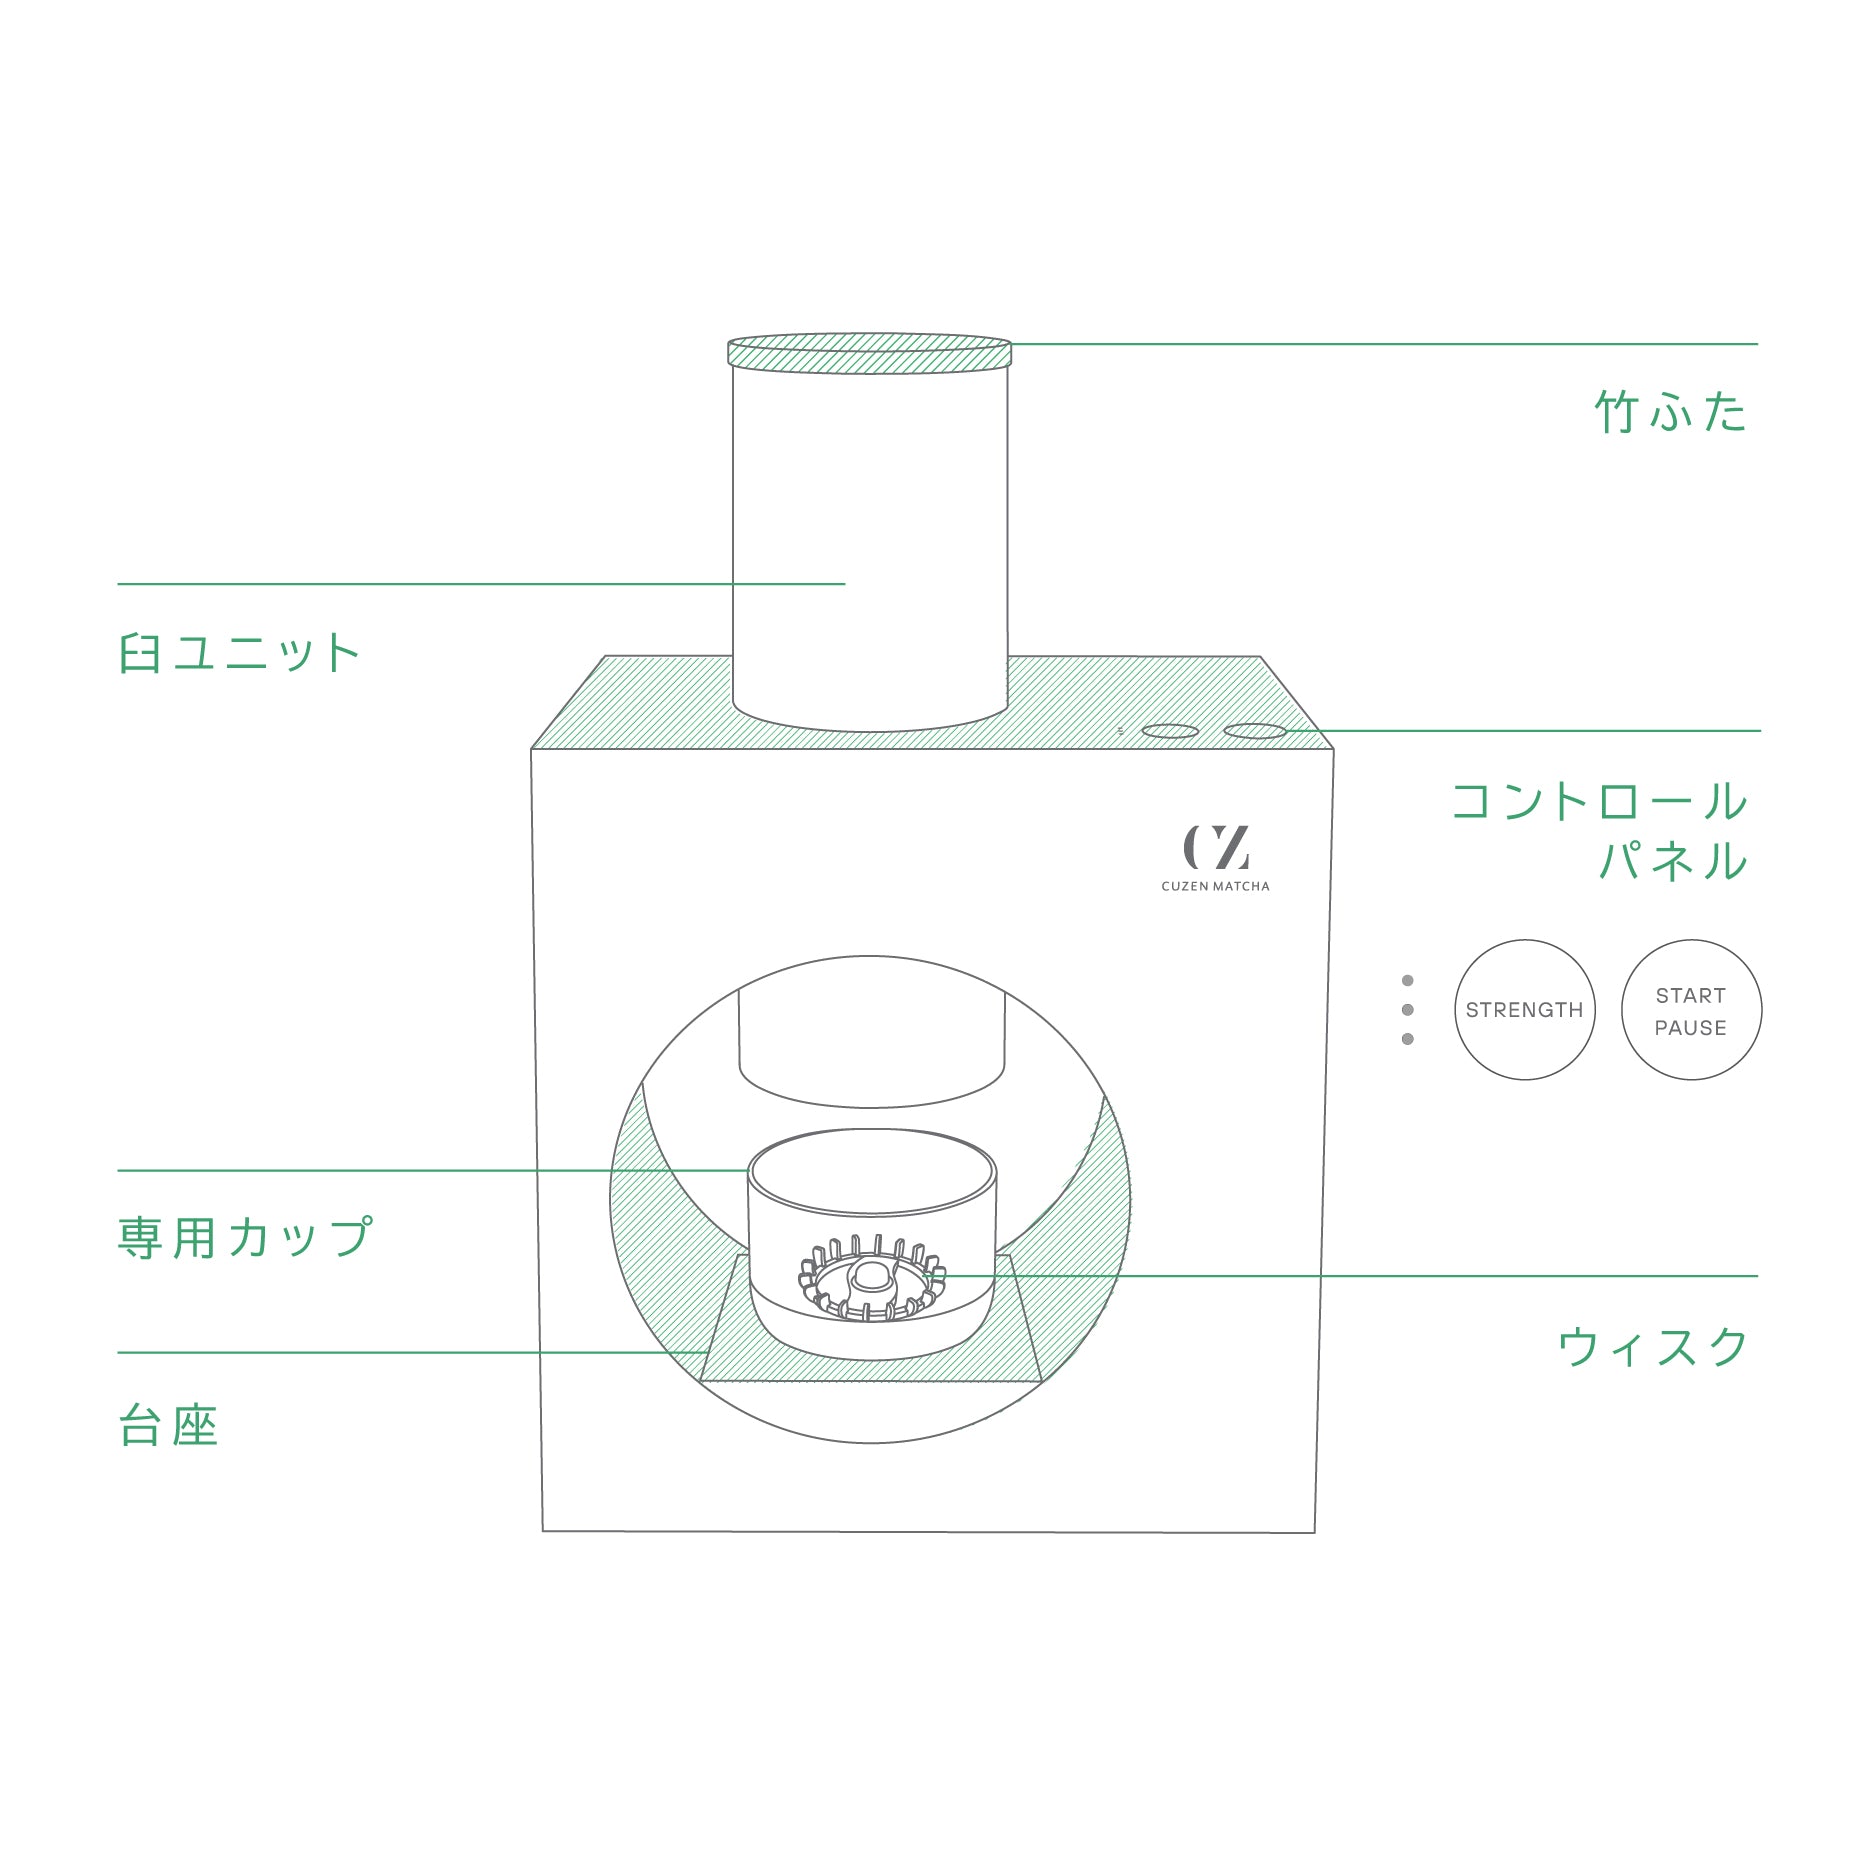 A diagram of the Matcha Maker and all its parts.